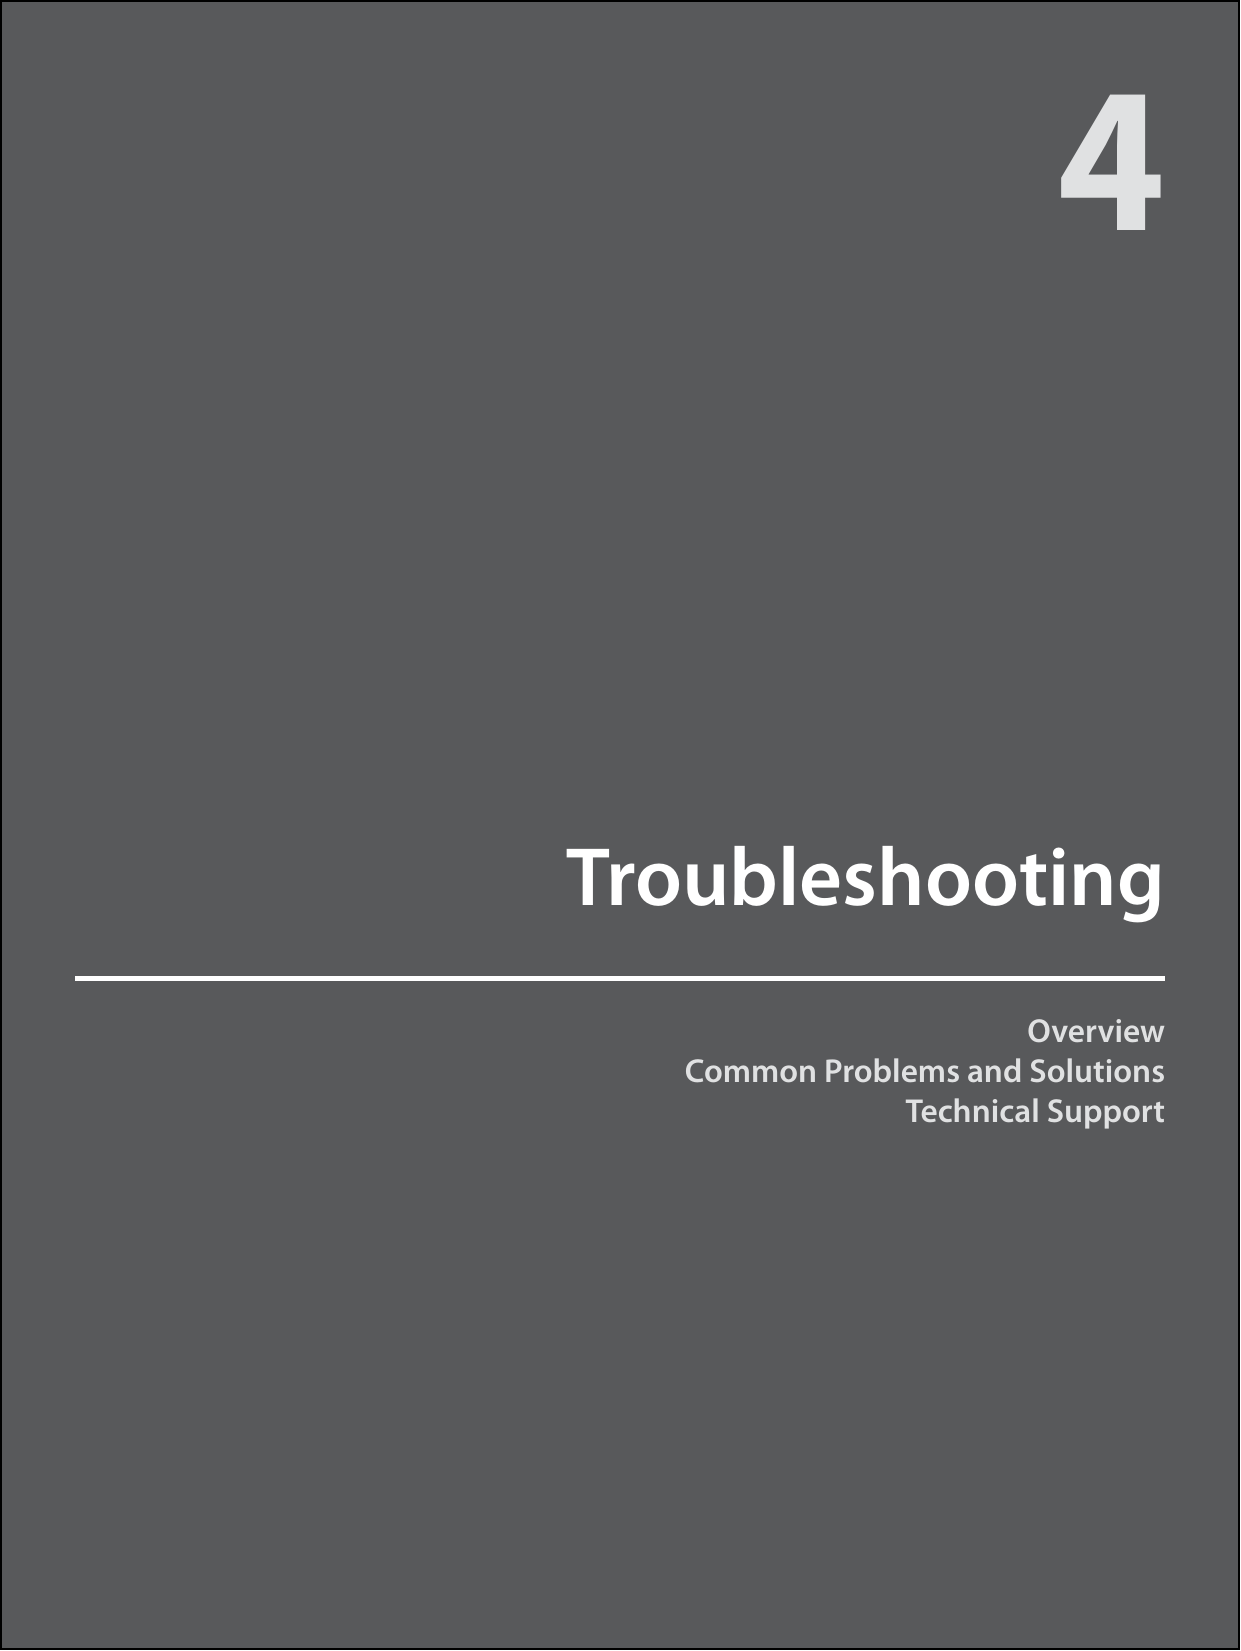 OverviewCommon Problems and SolutionsTechnical SupportTroubleshooting4